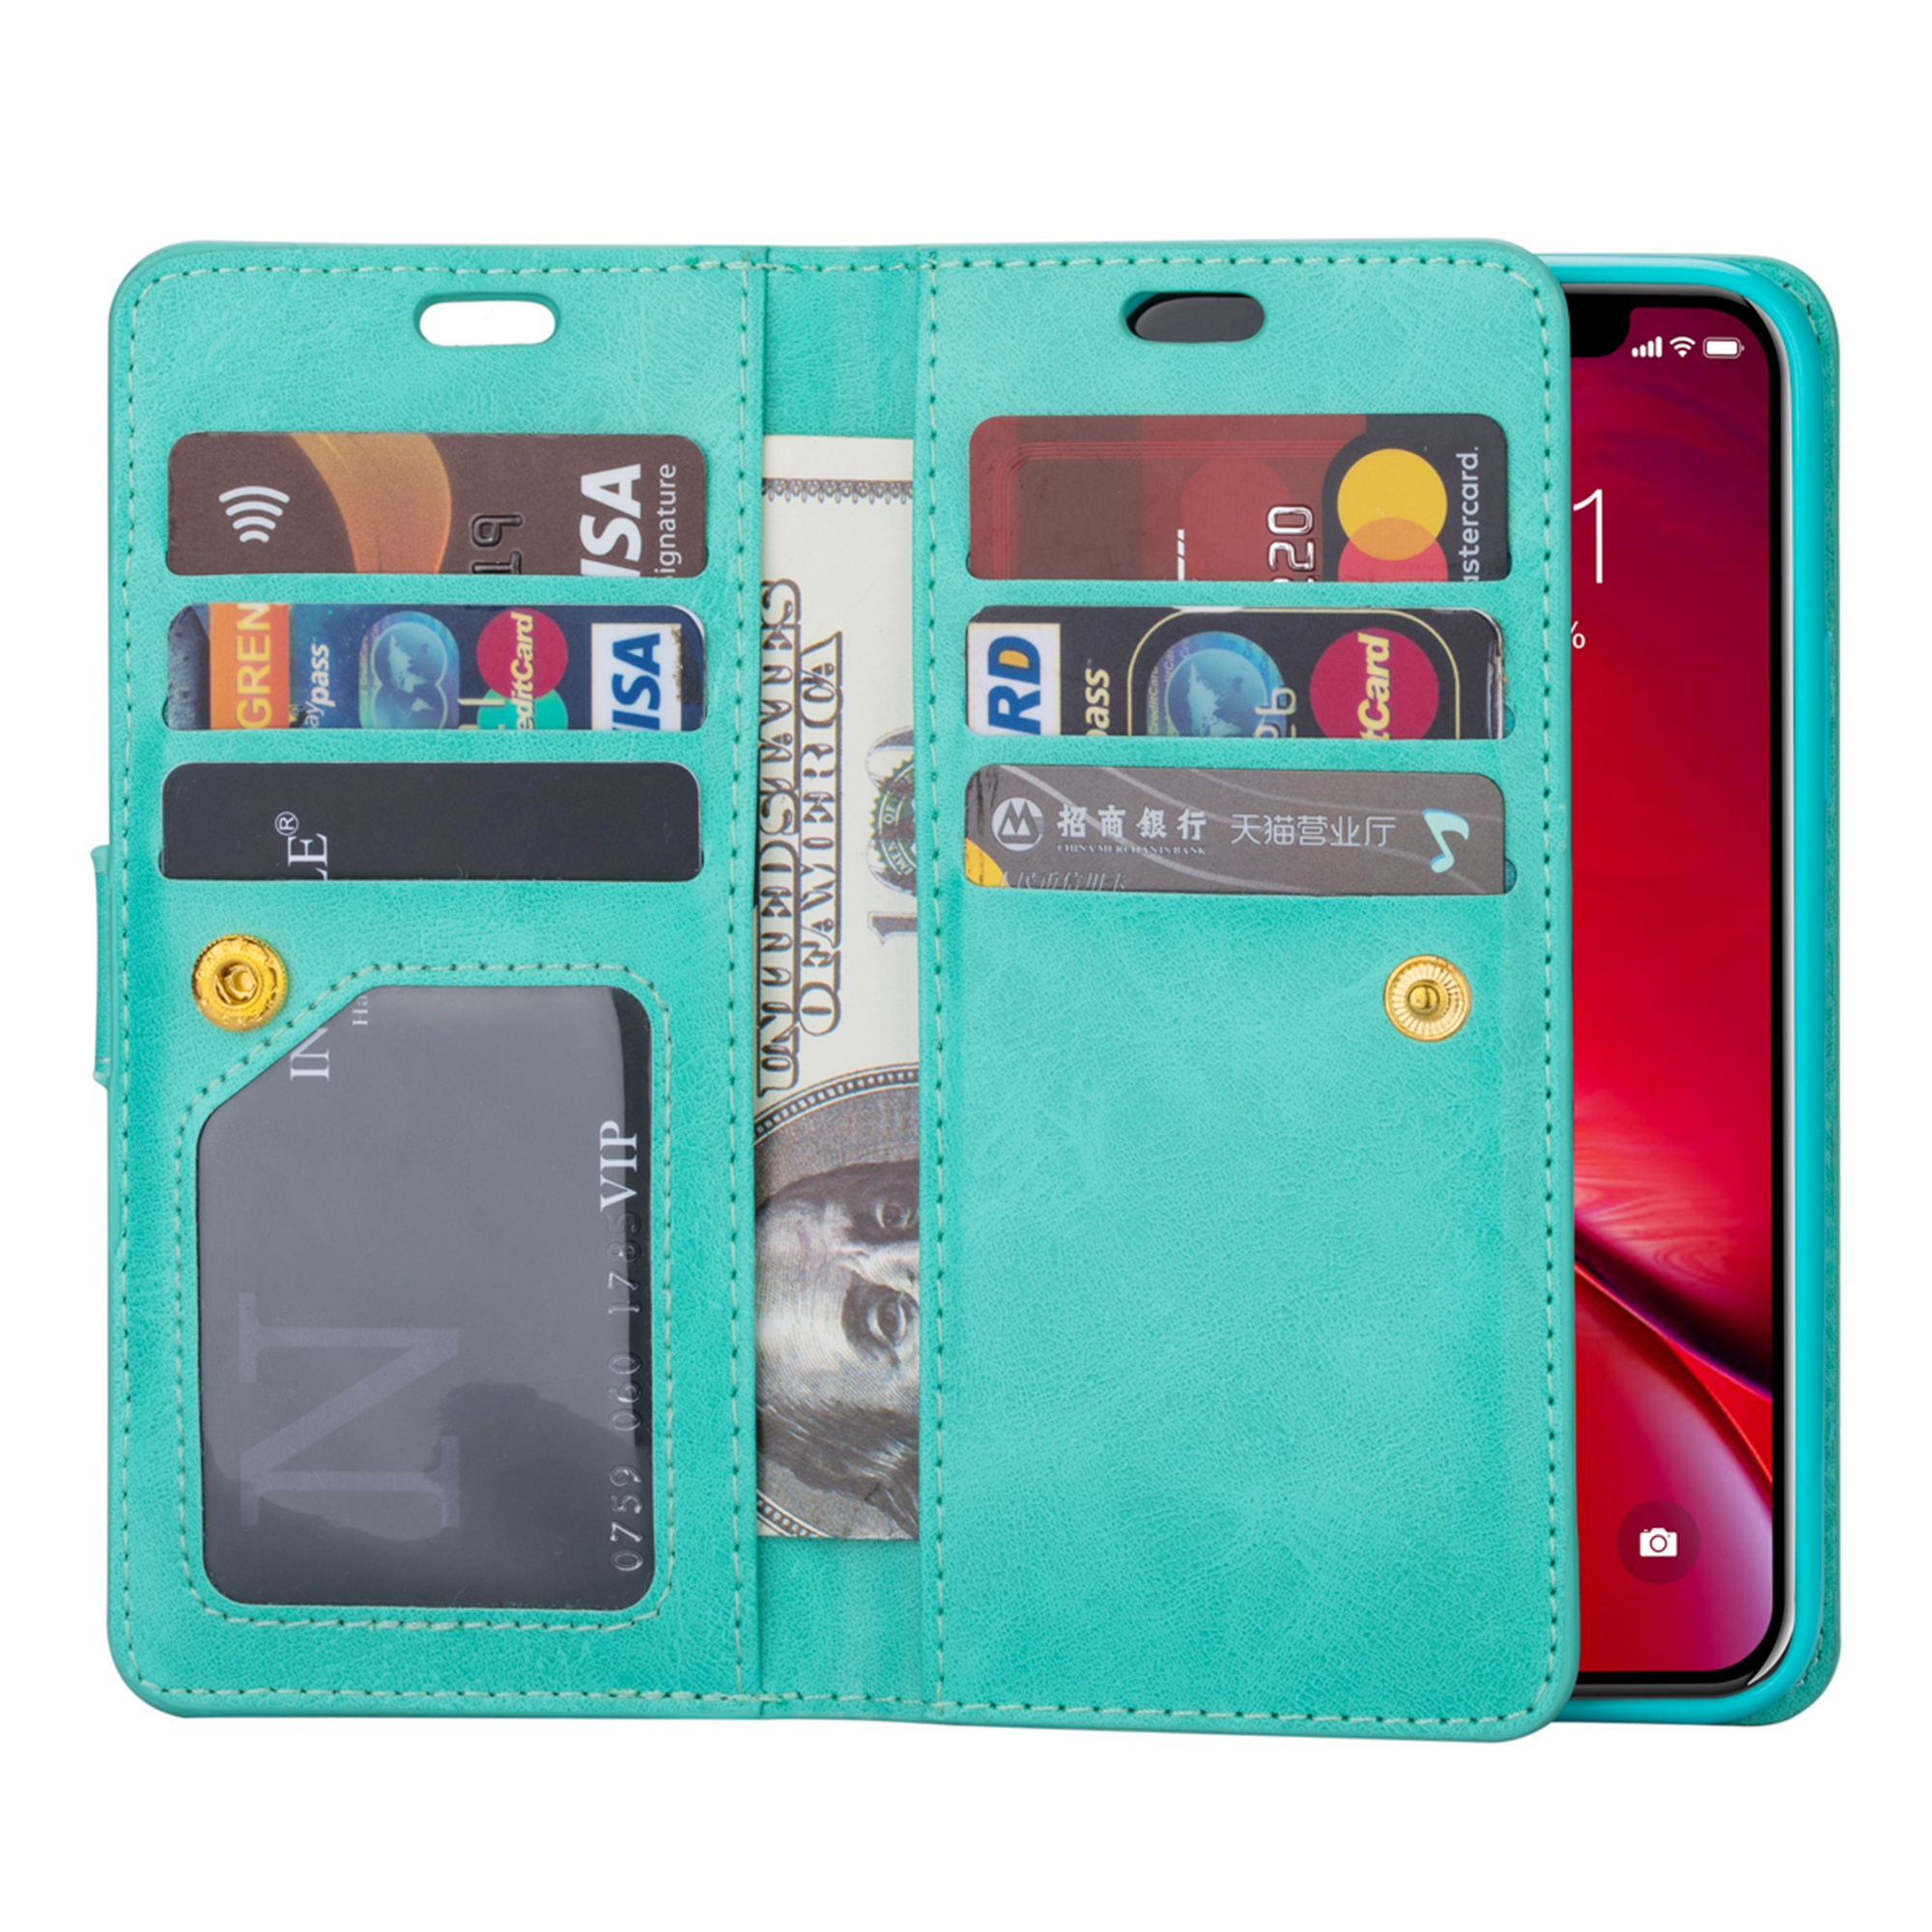 iPhone 11 Pro Max 6.5 inch Wallet Case, Dteck 9 Card Slots Premium Leather Zipper Purse case Flip Kickstand Folio Magnetic with Wrist Strap Credit Cash Cover For Apple iPhone 11 Pro Max, Mint - image 4 of 7